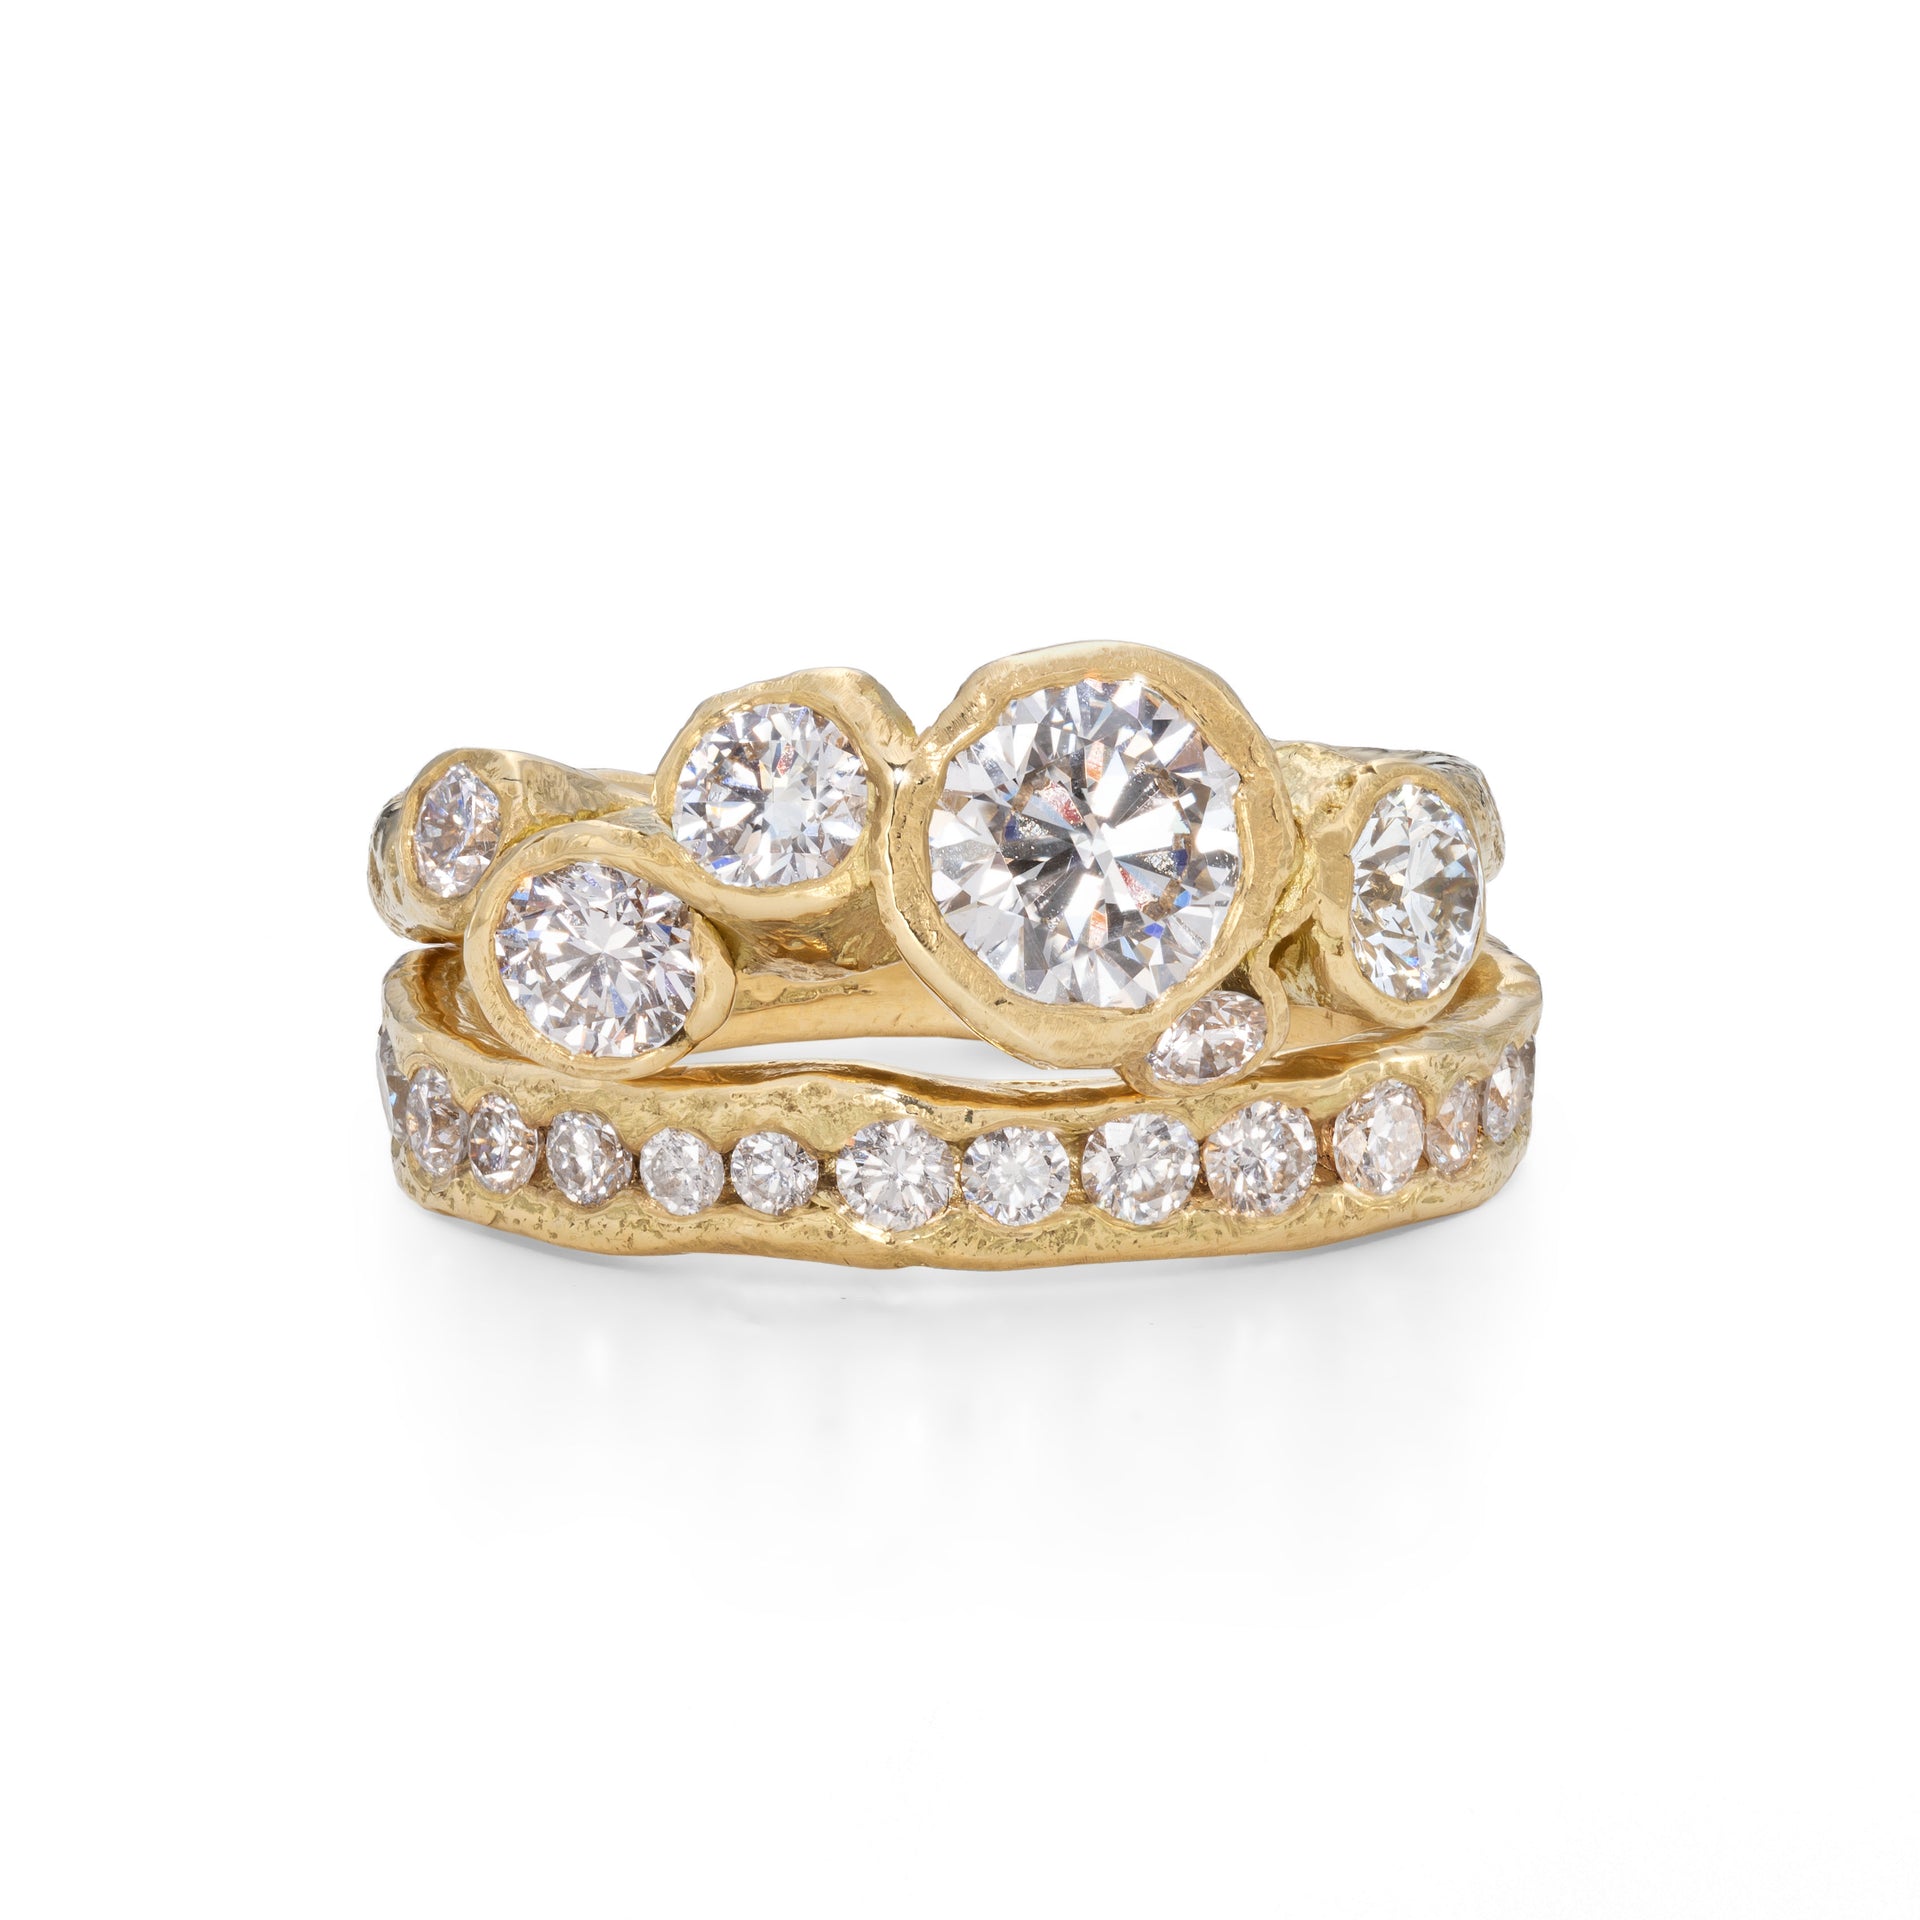 A diamond and gold engagement ring, set with 6 diamonds, with a central diamond in the middle. Photographed next to a gold channel ring, with diamonds set all the way around the band.